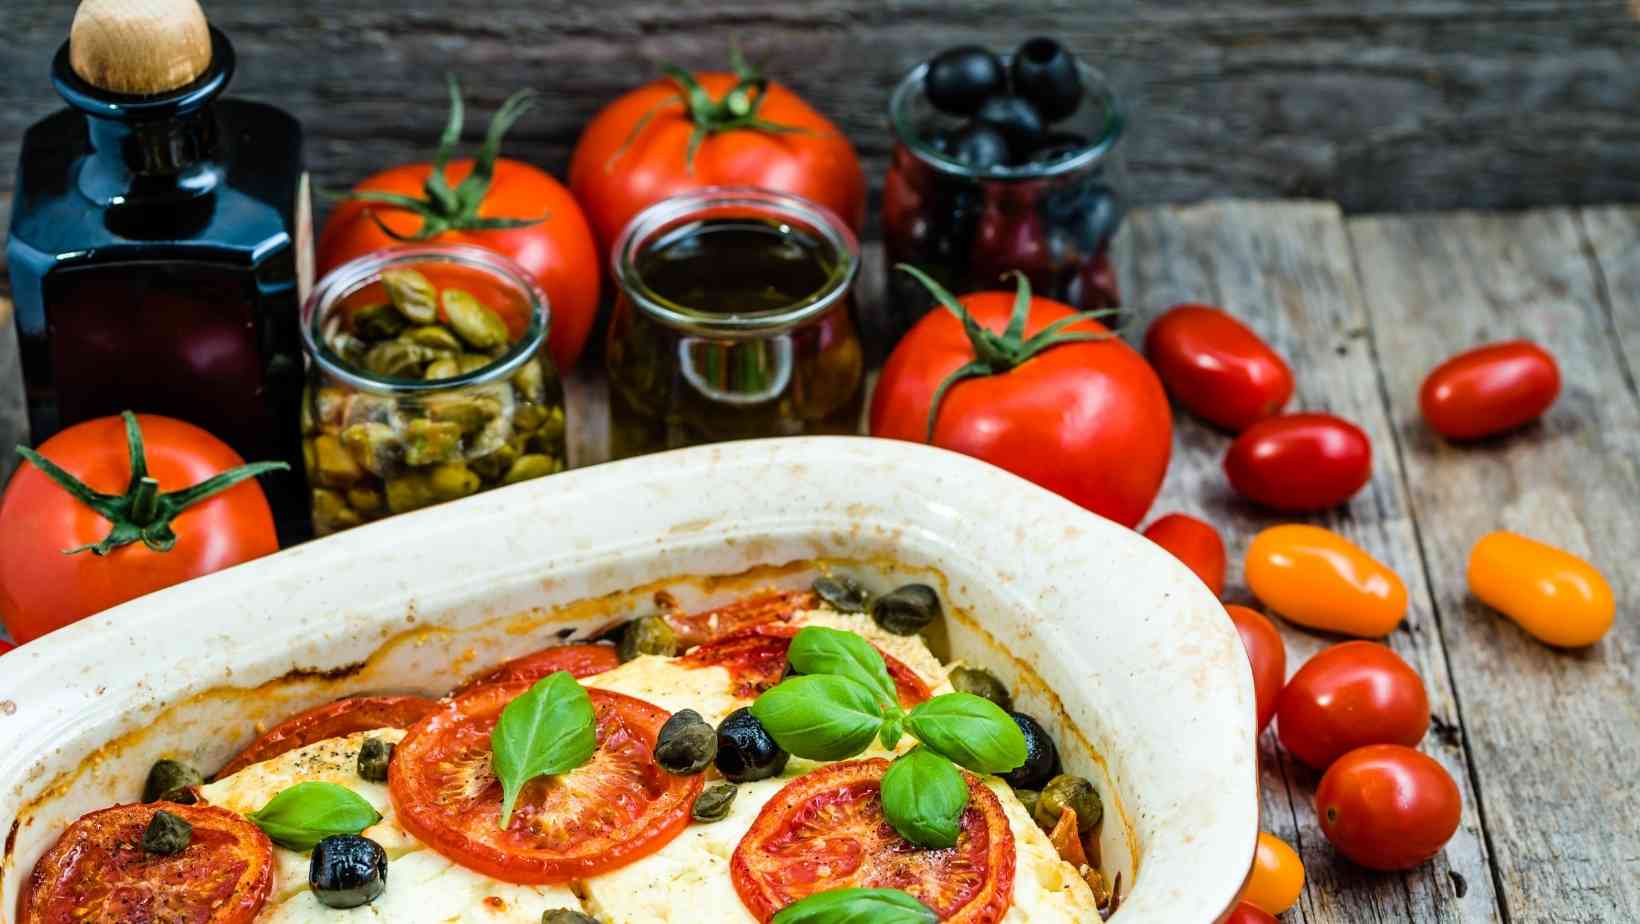 Vegetarian and Mediterranean diets - How To Follow A Plant-Based Diet